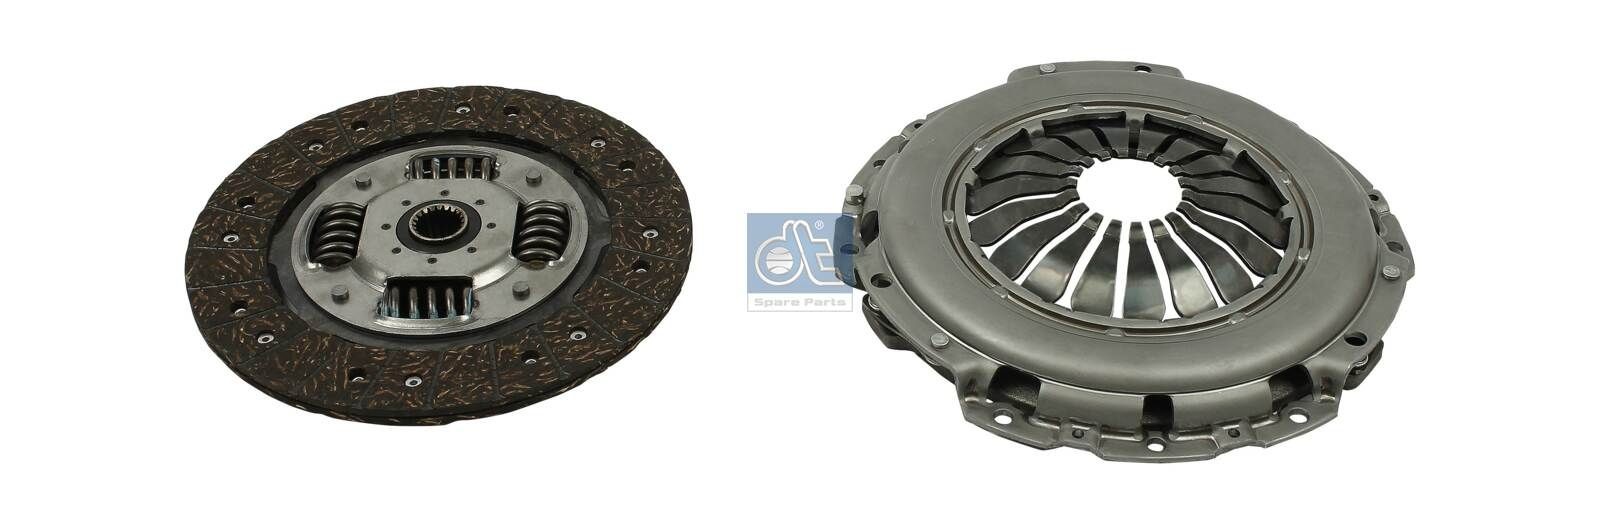 Original DT Spare Parts 3000 951 103 Clutch replacement kit 6.93044 for RENAULT MASTER